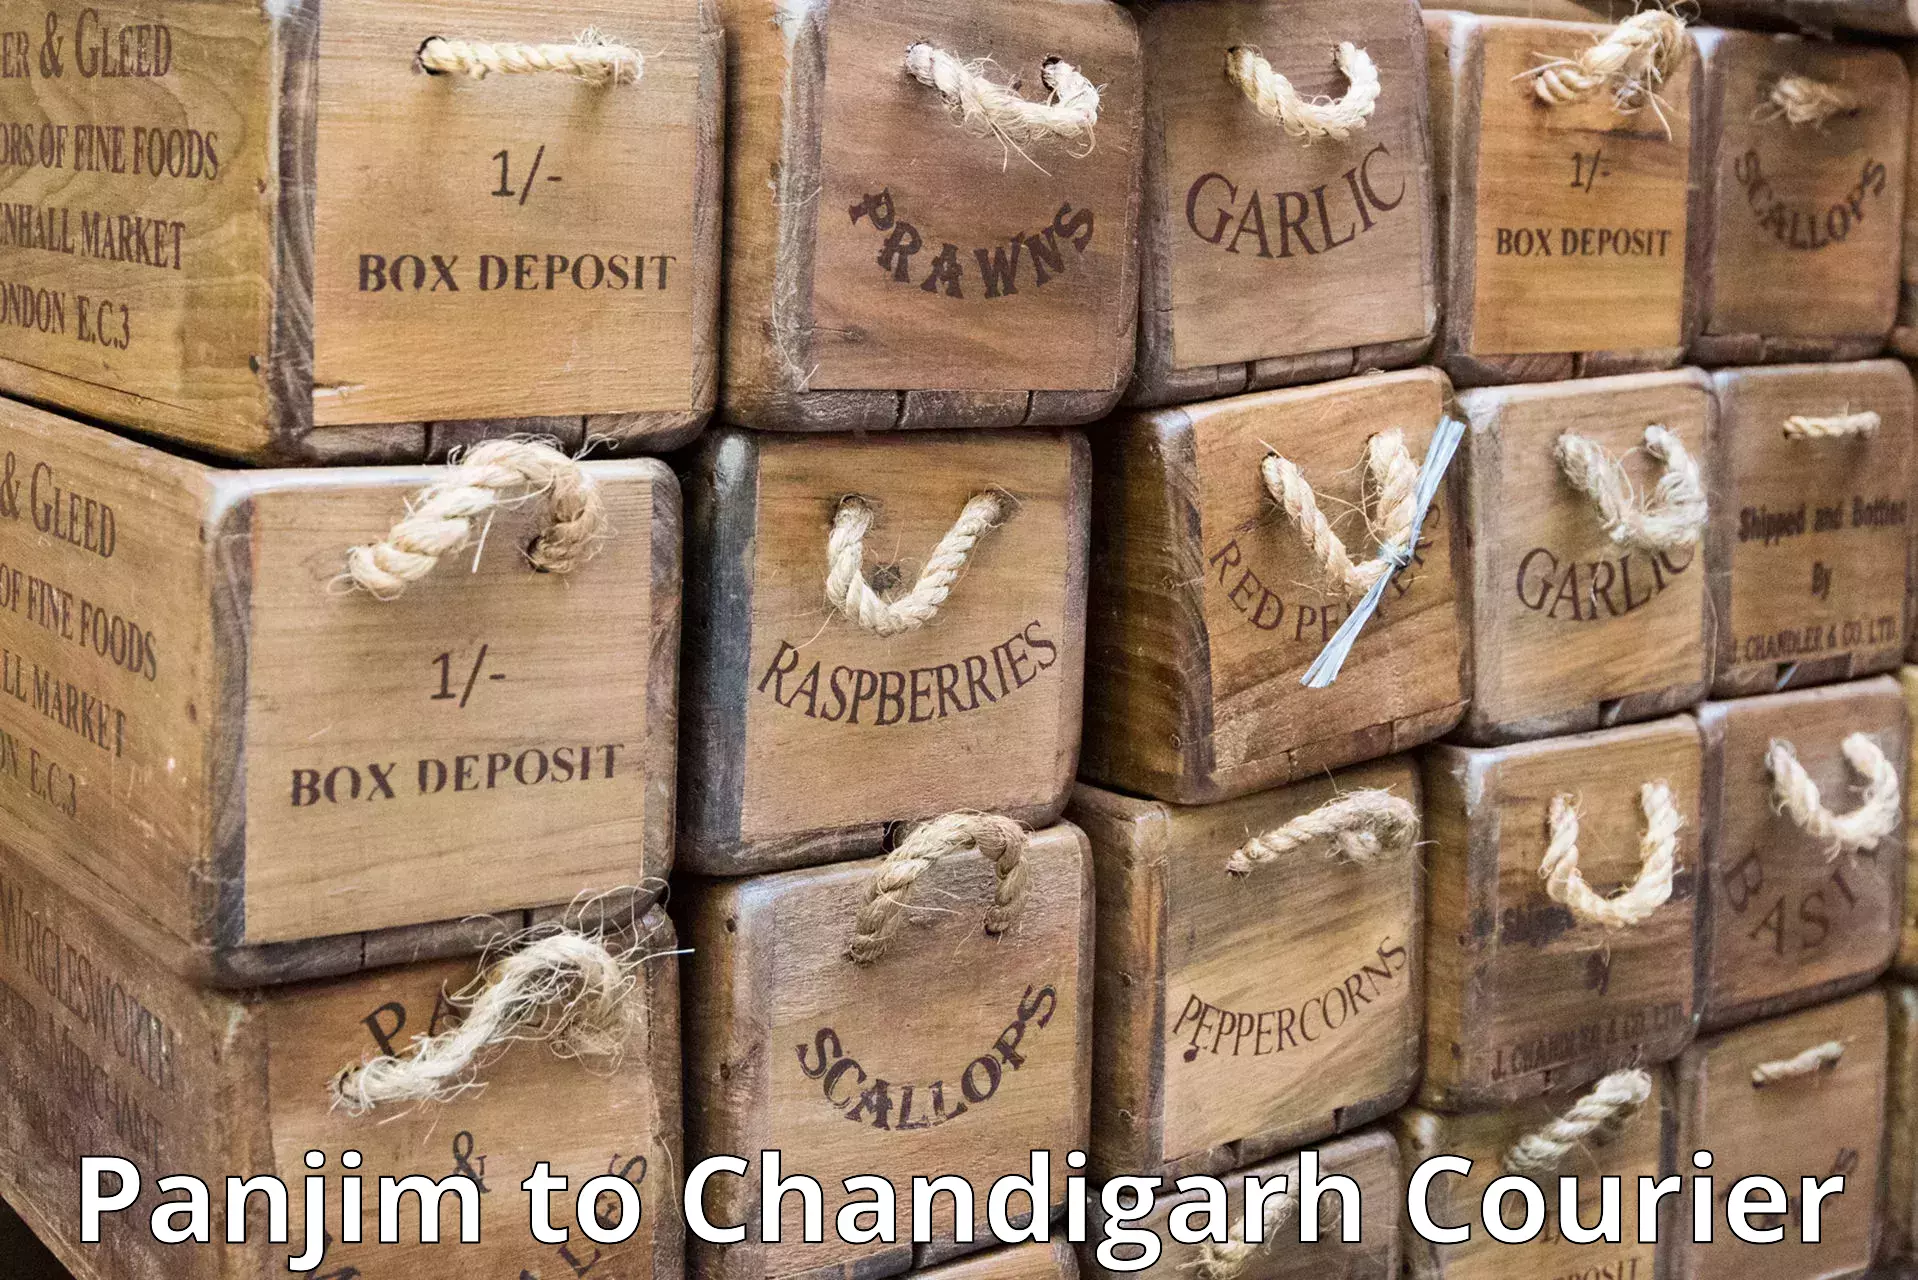 Special handling courier Panjim to Chandigarh